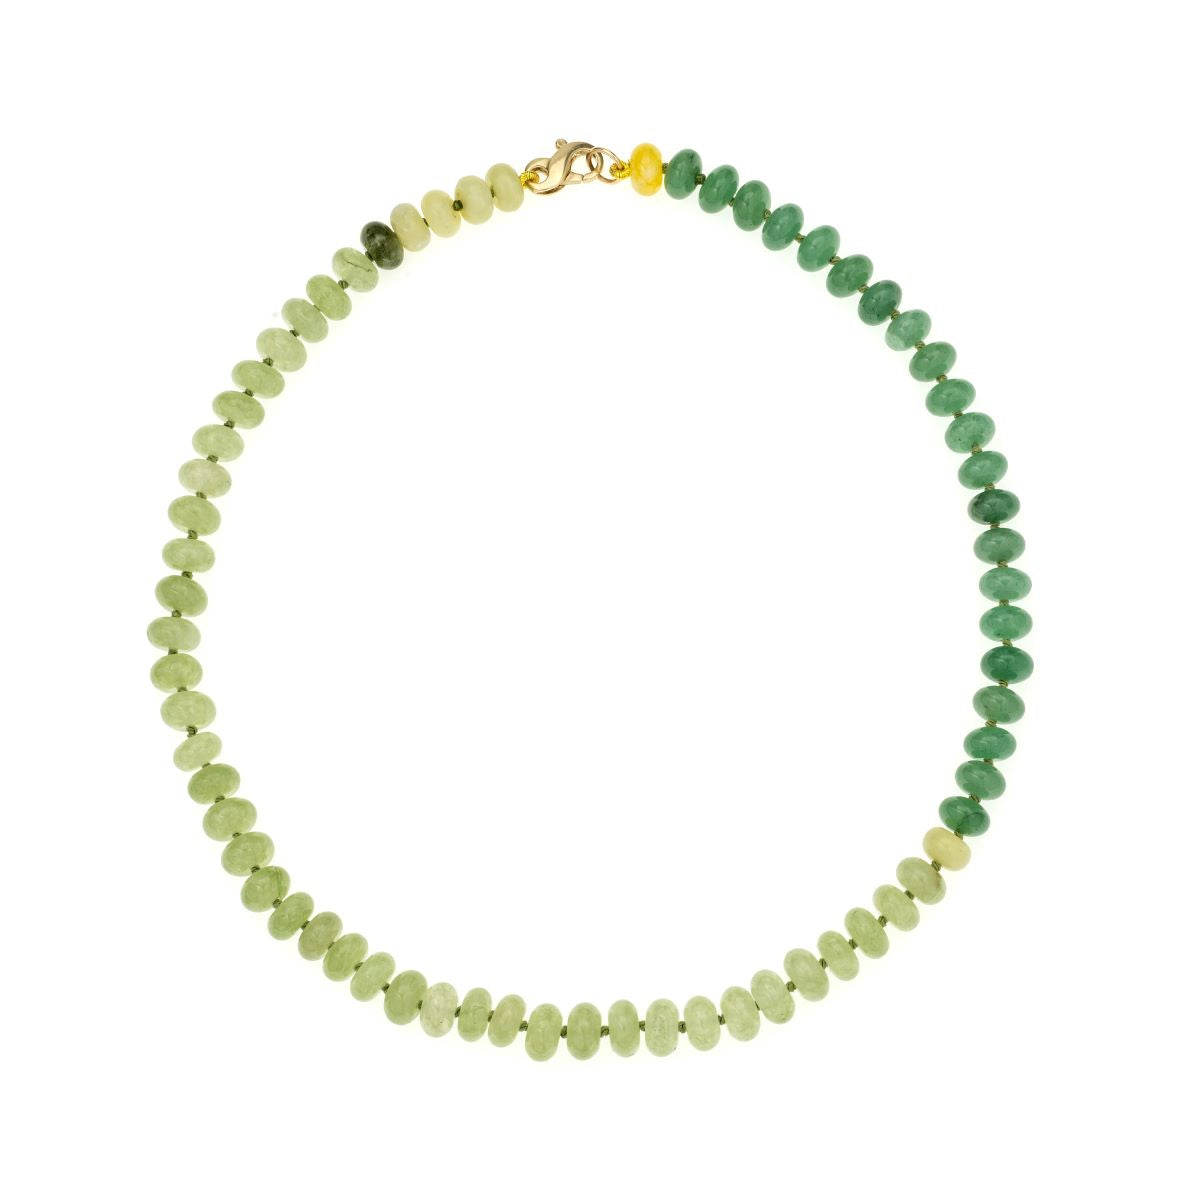 Shades of Green Gemstone Necklace